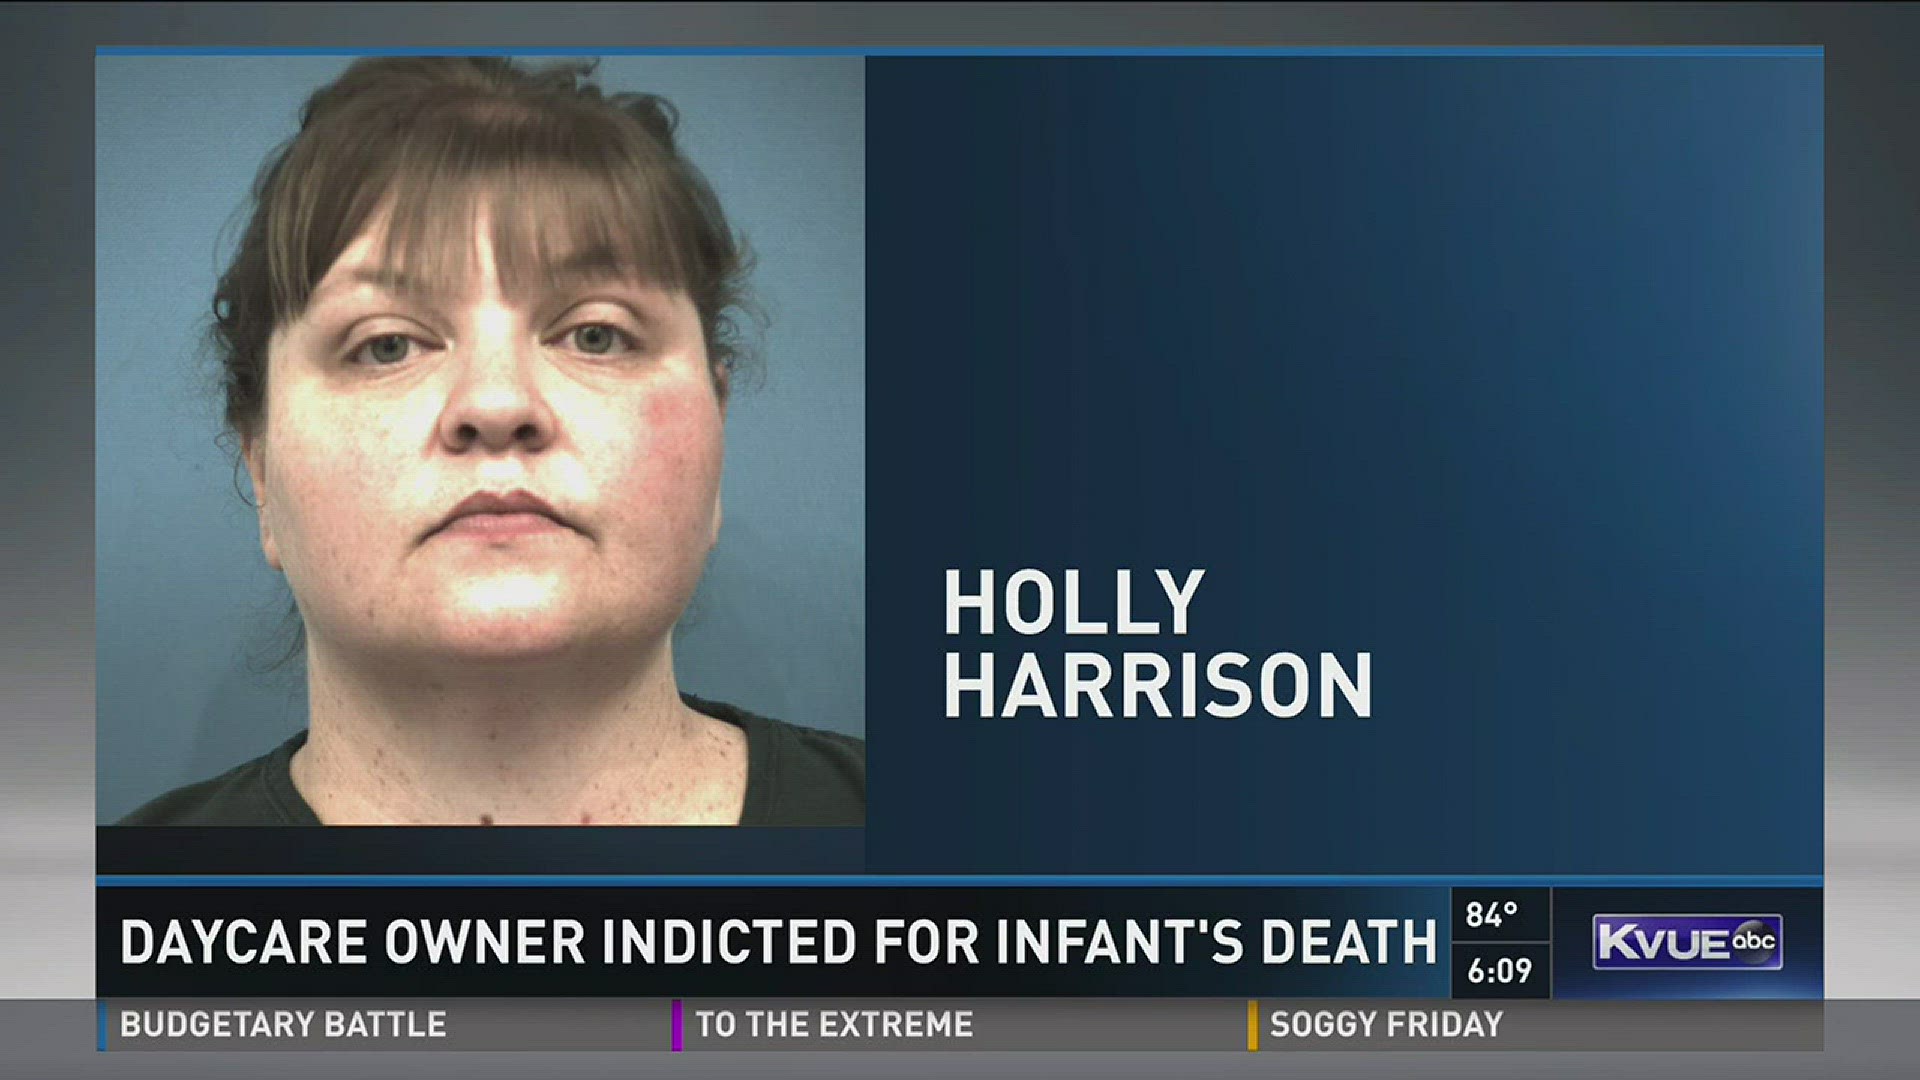 Daycare owner indicted for infant's death